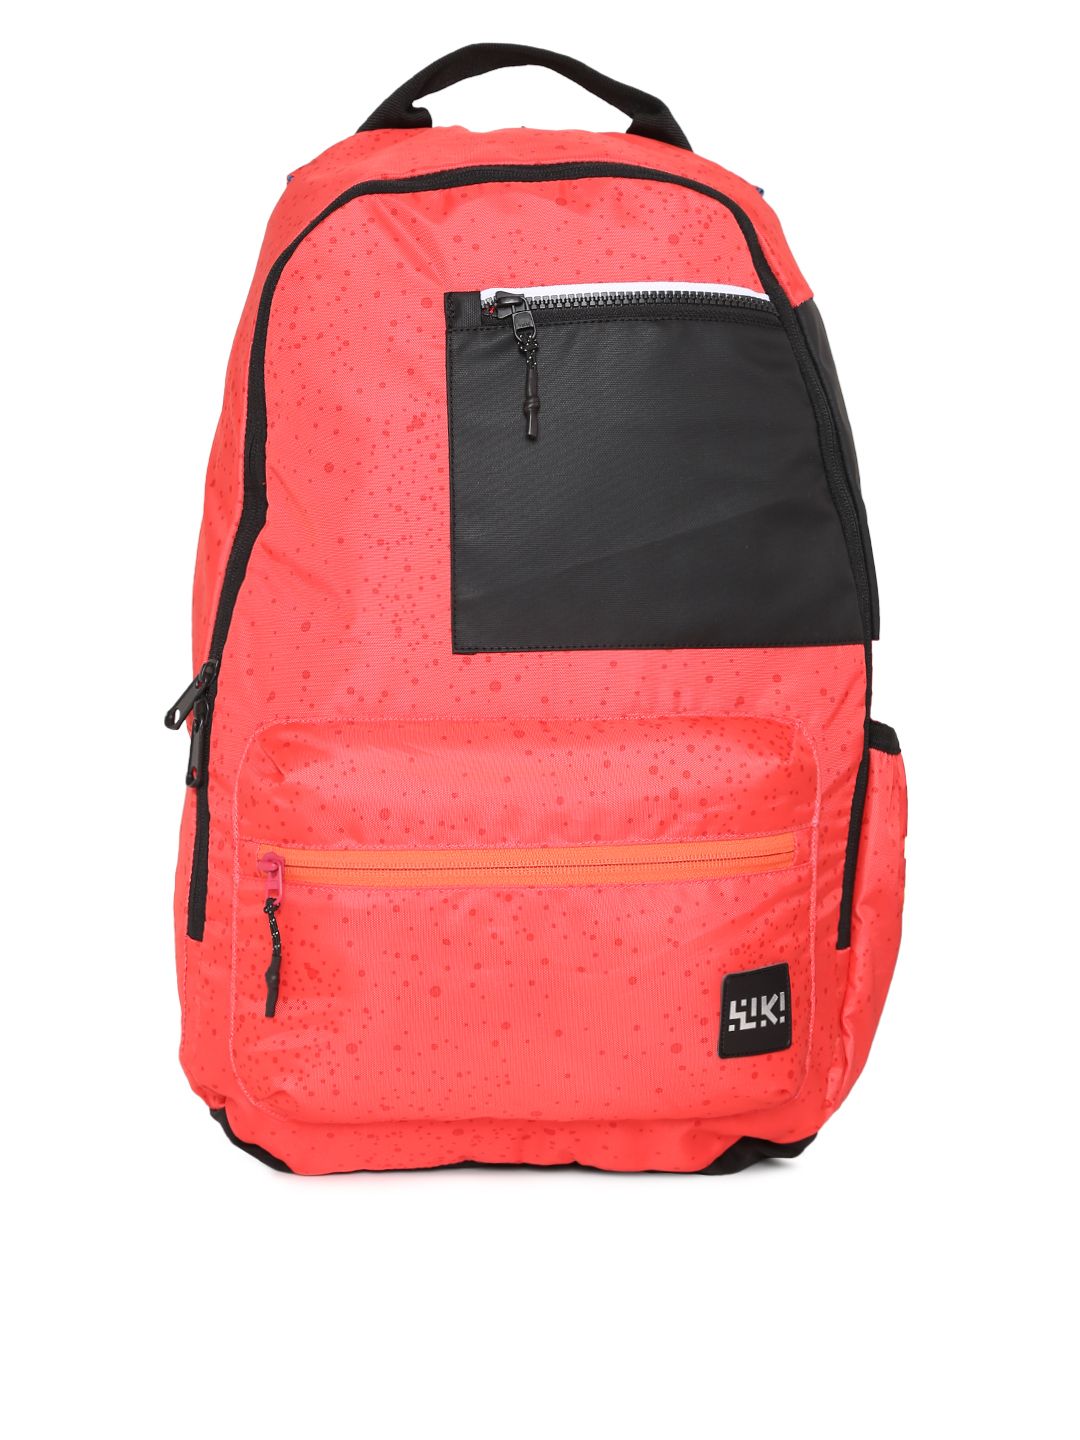 Wildcraft Duo-pack Unisex Red & Black Colourblocked Reversible Backpack Price in India